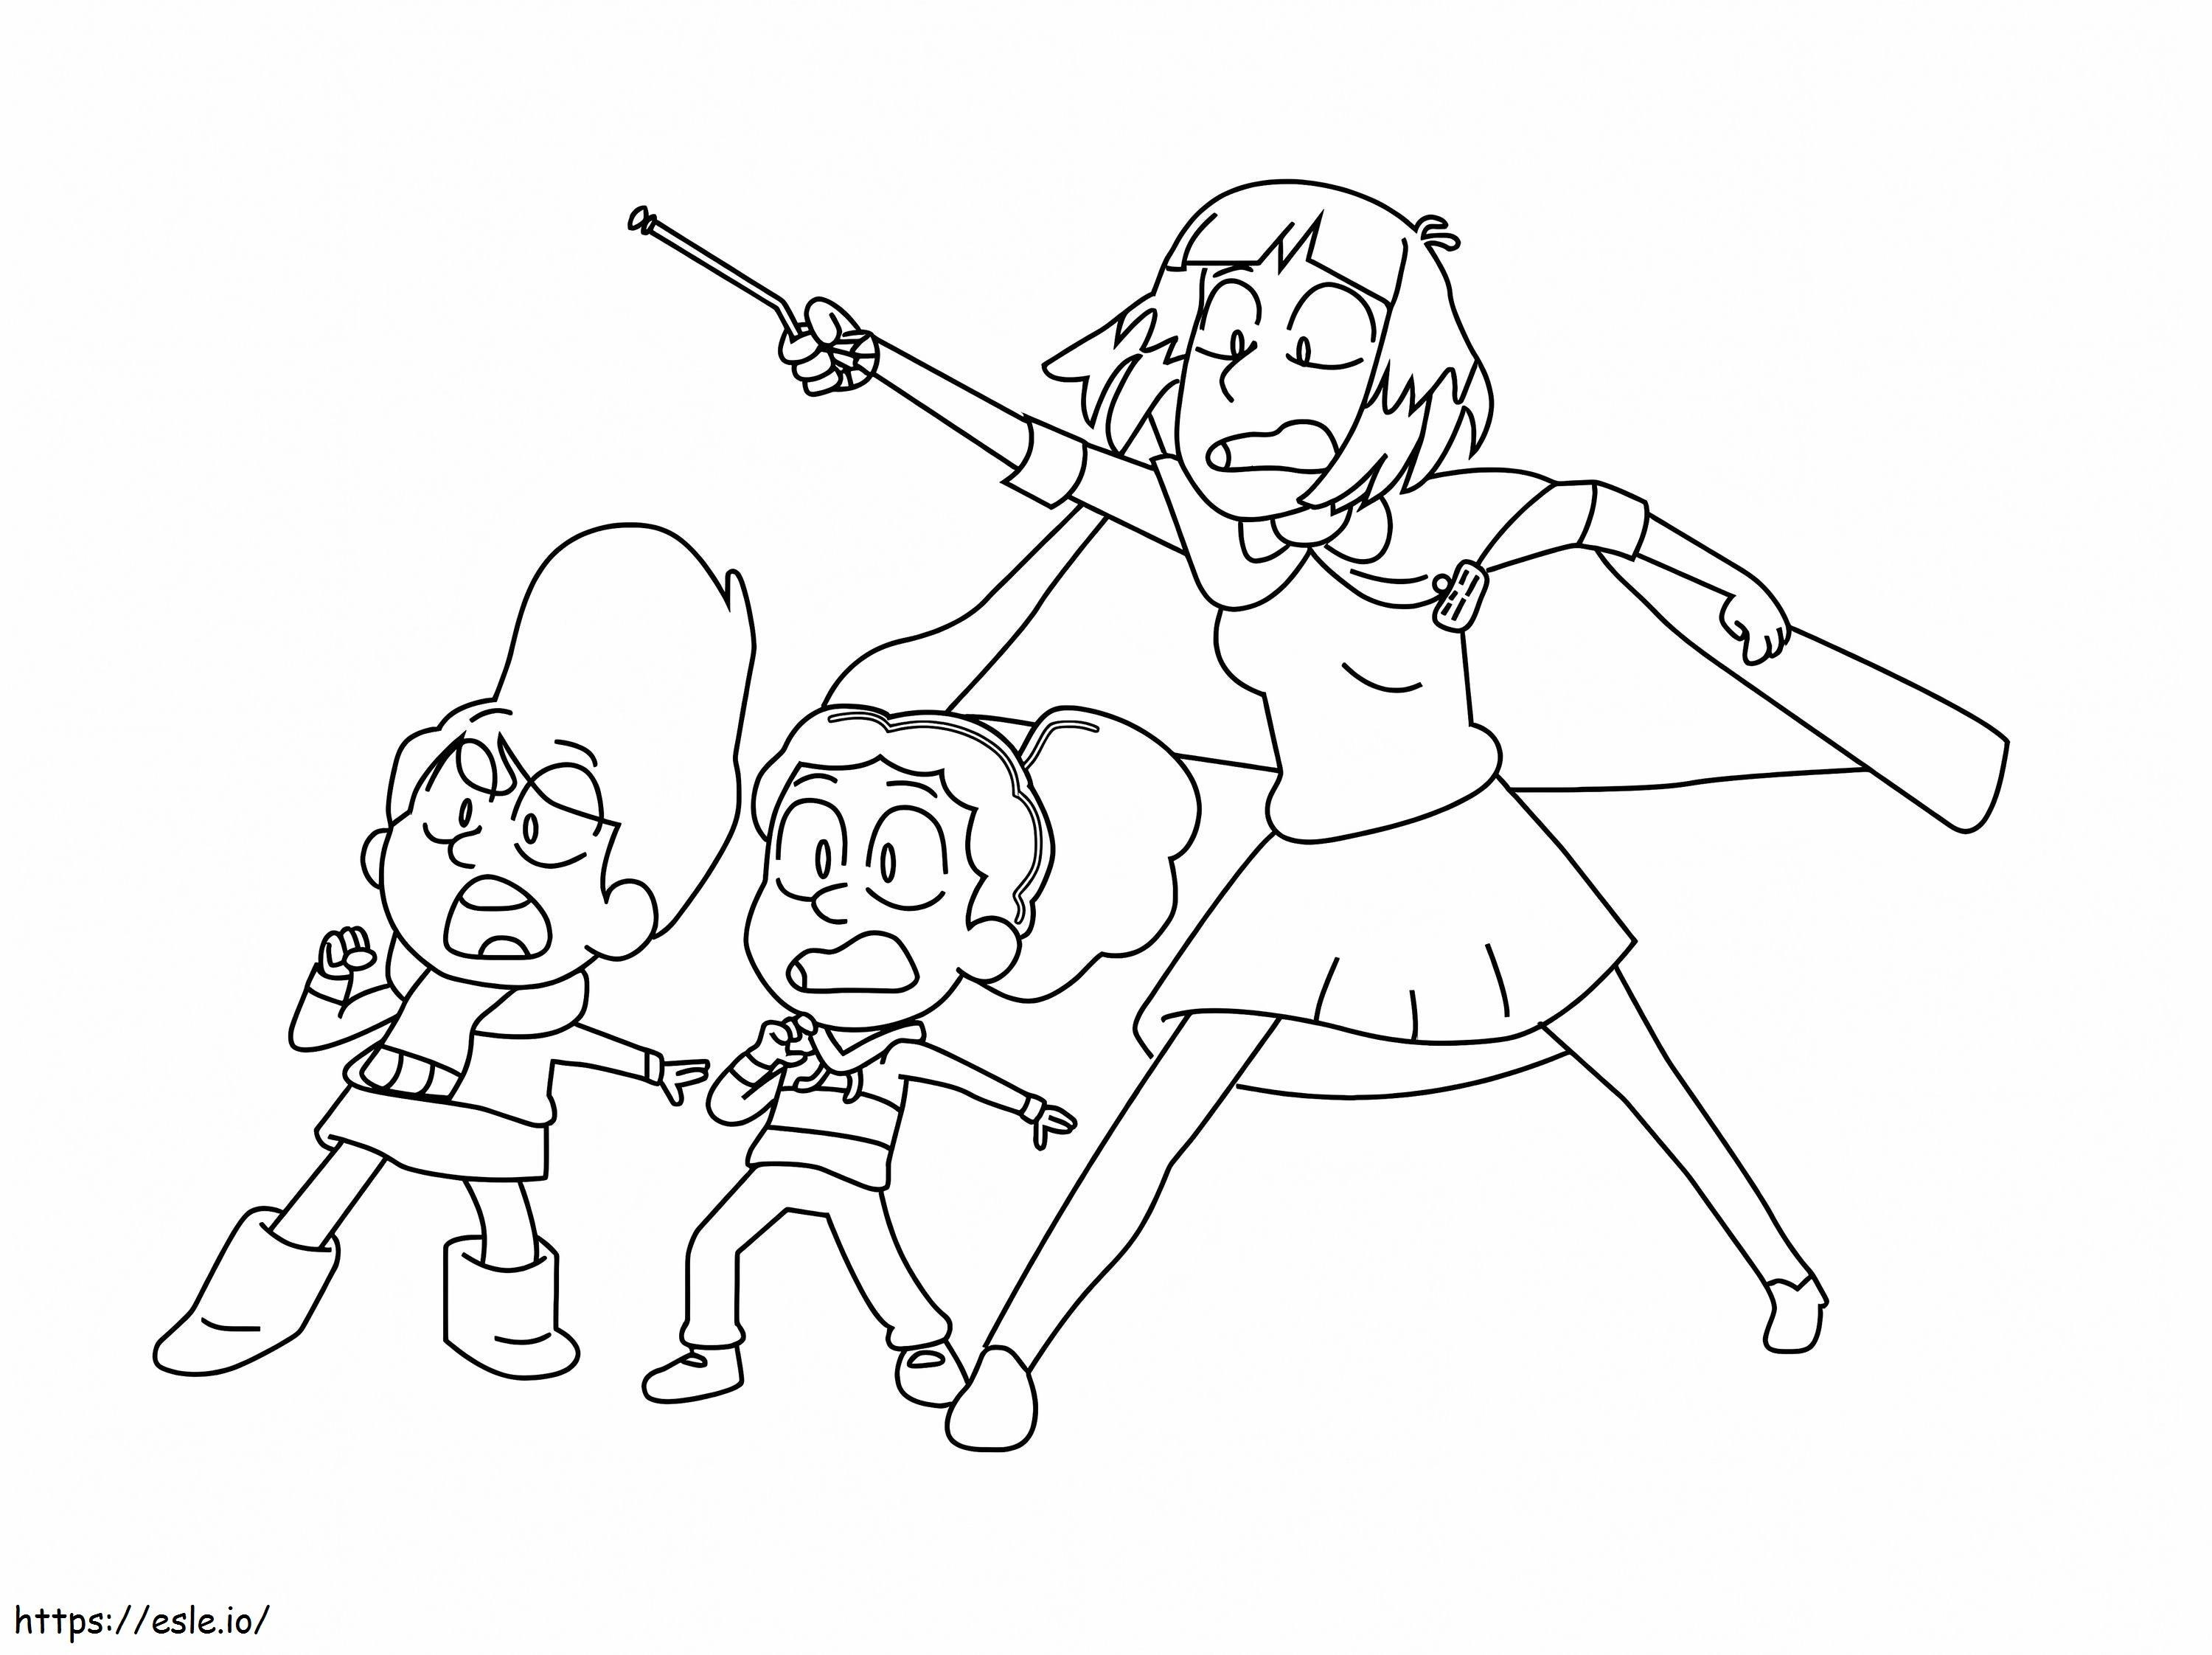 Hilda And Her Scared Friends coloring page